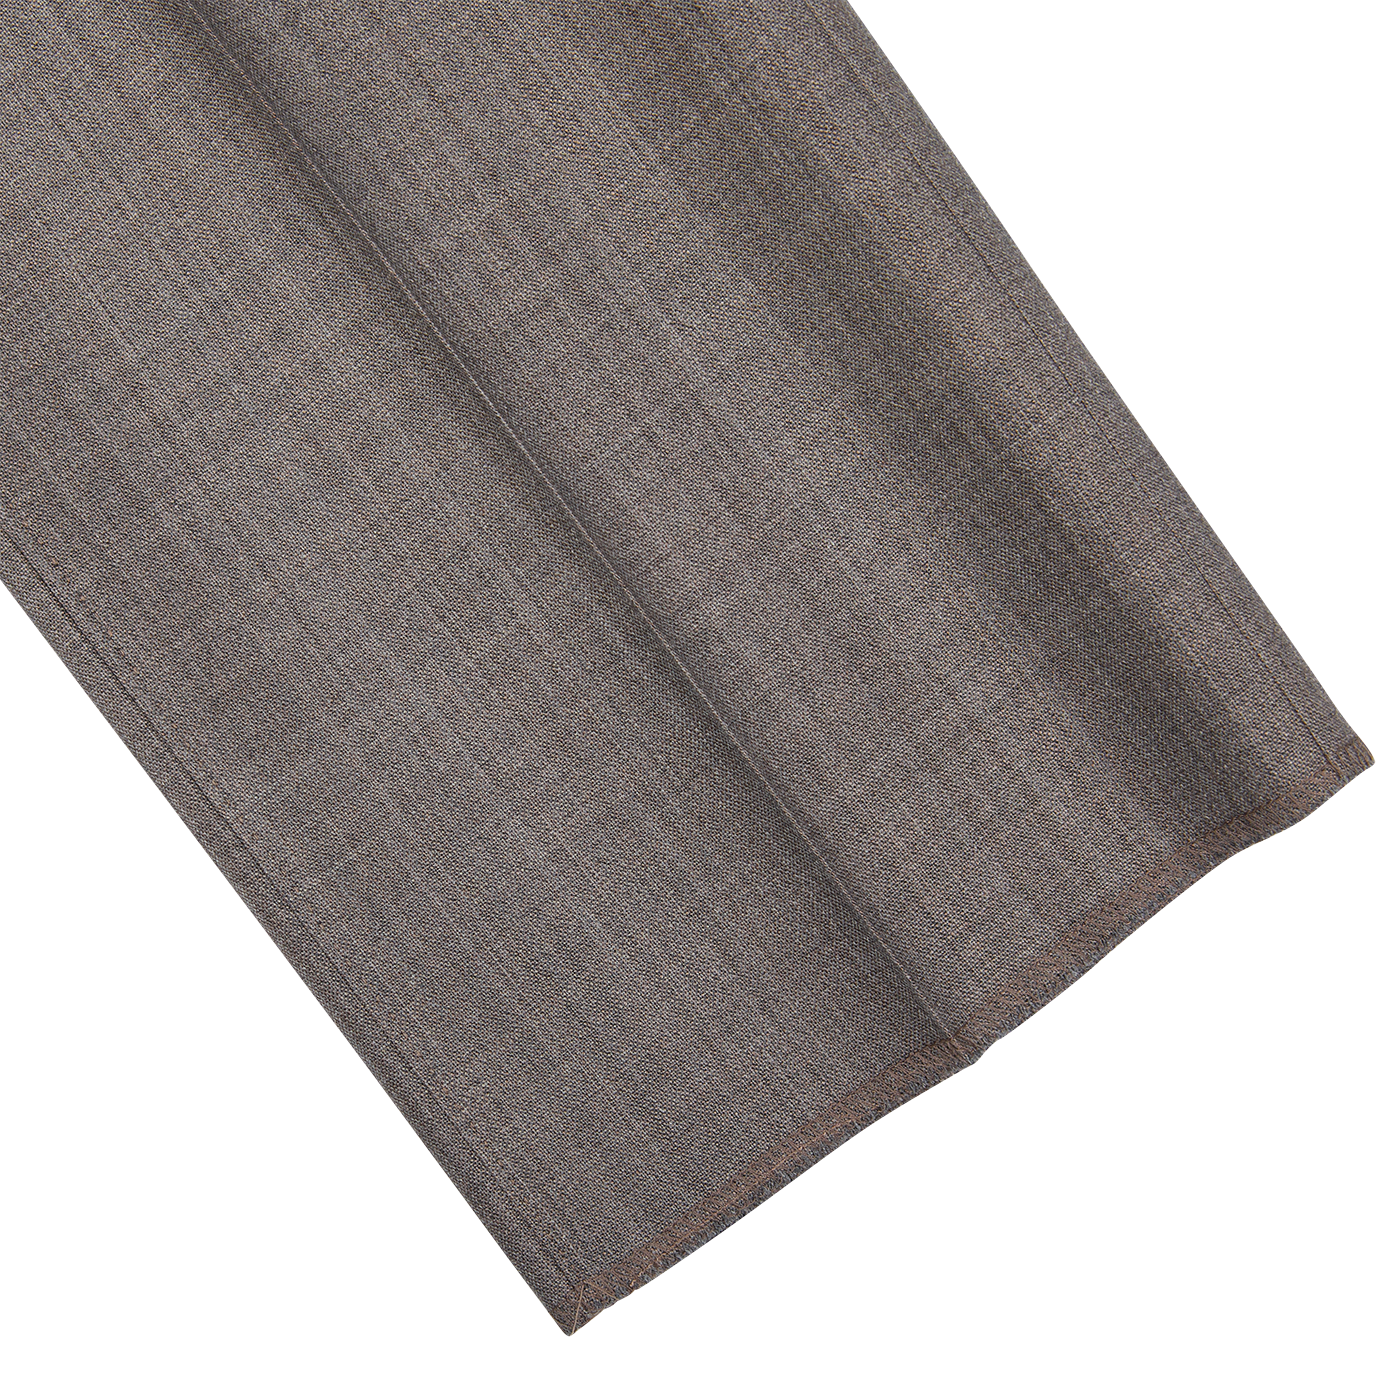 Folded Mid Grey High-Twist Wool Suit fabric from Ring Jacket on a patterned background.